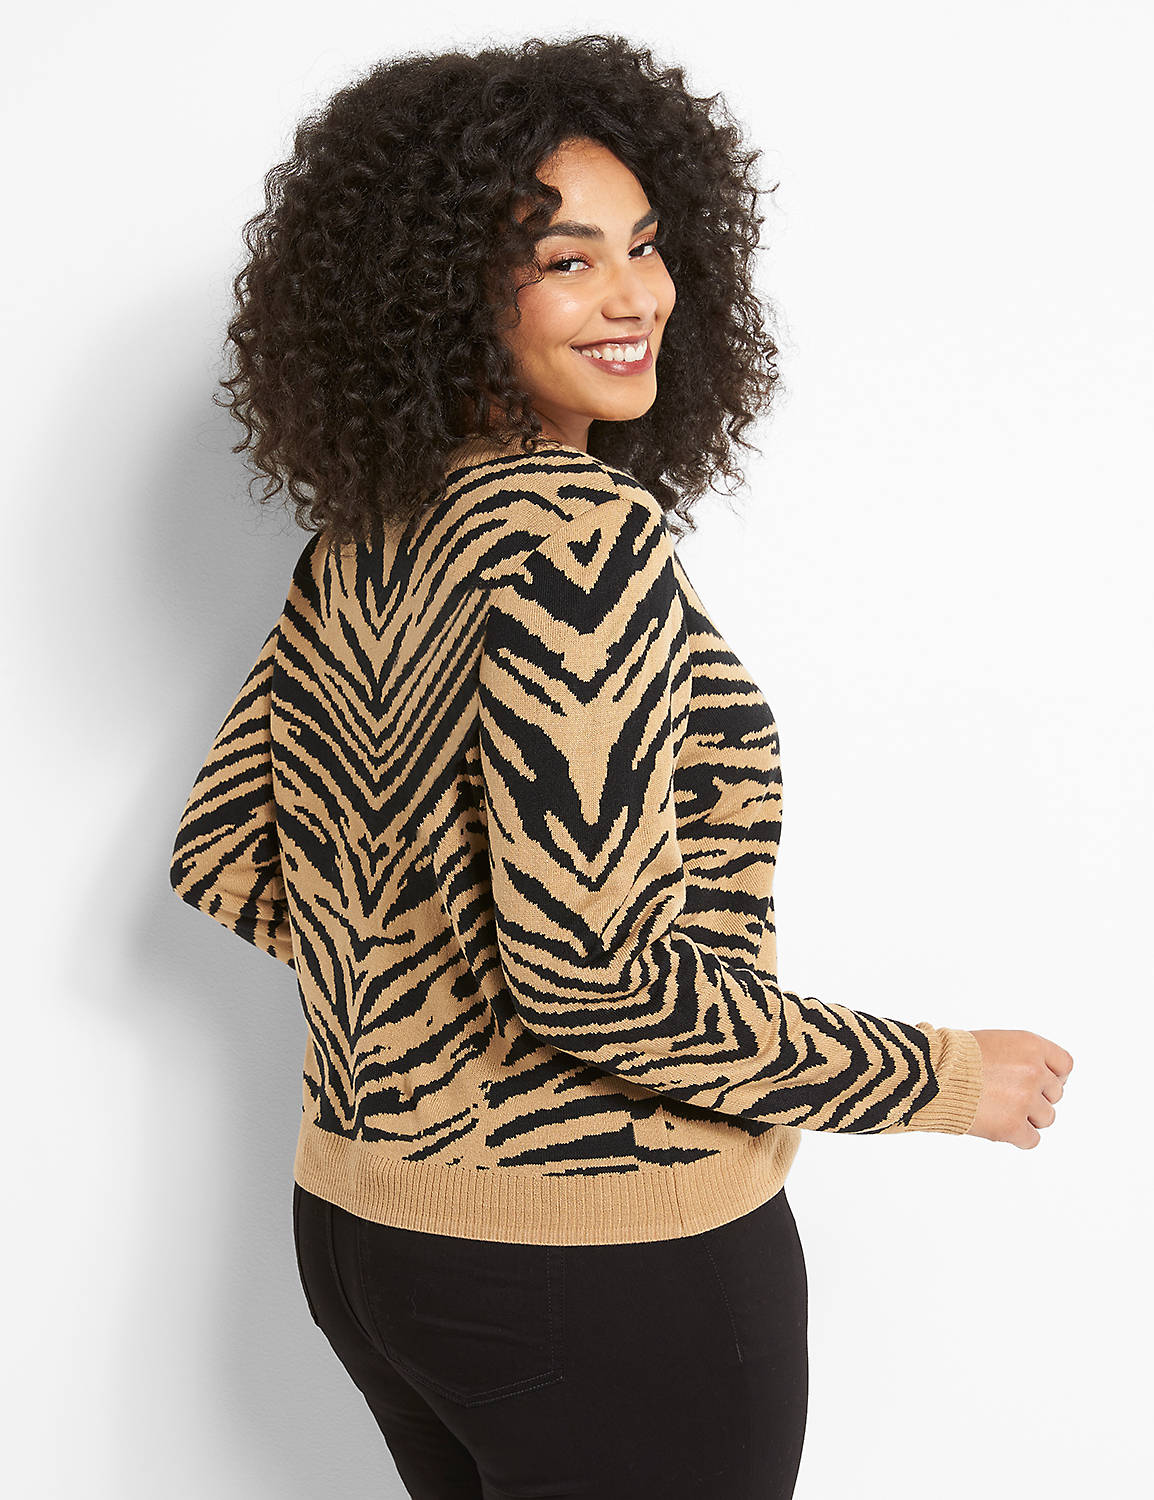 Tiger Print Cropped Sweater Product Image 2